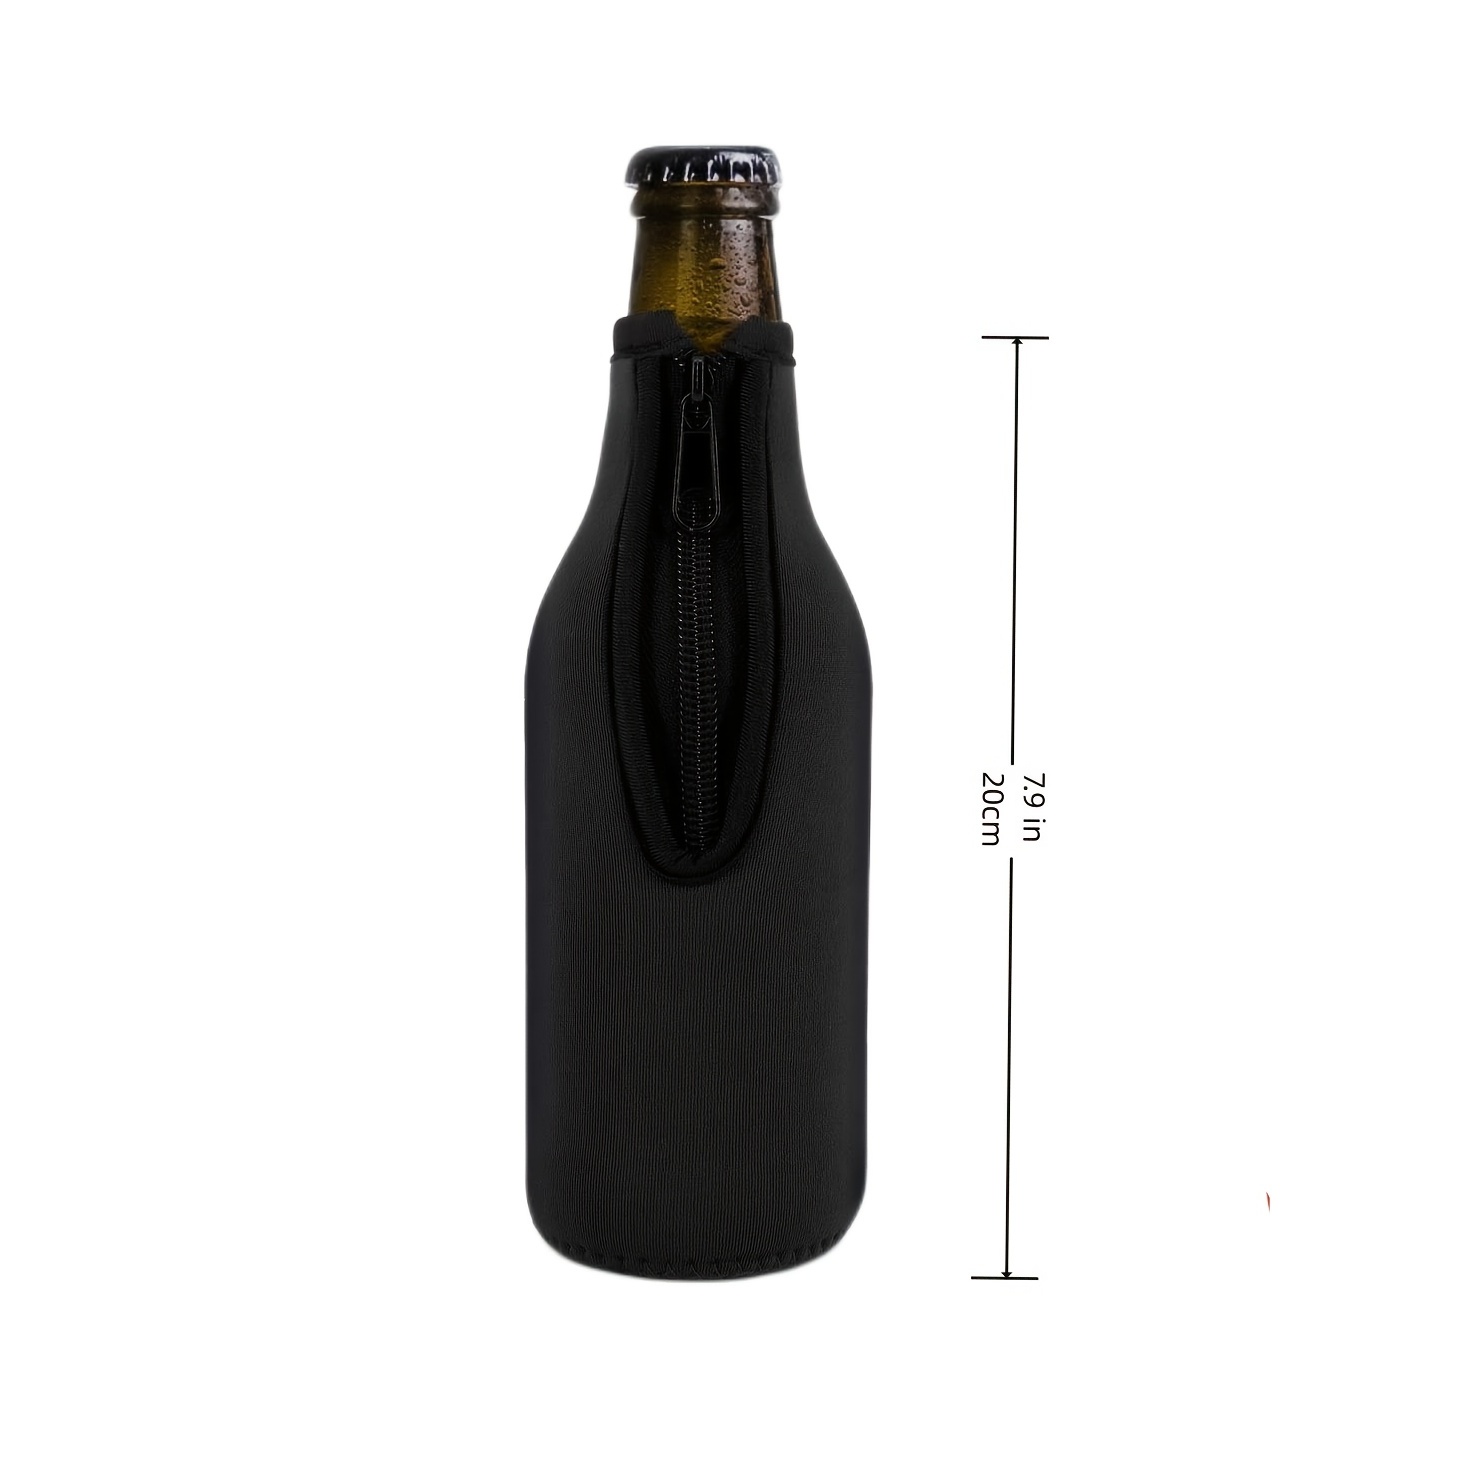 4 Pcs Beer Bottle Insulator Sleeve Different Color. Zip-up Bottle Jackets.  Keeps Beer Cold and Hands Warm. Classic Extra Thick Neoprene with Stitched